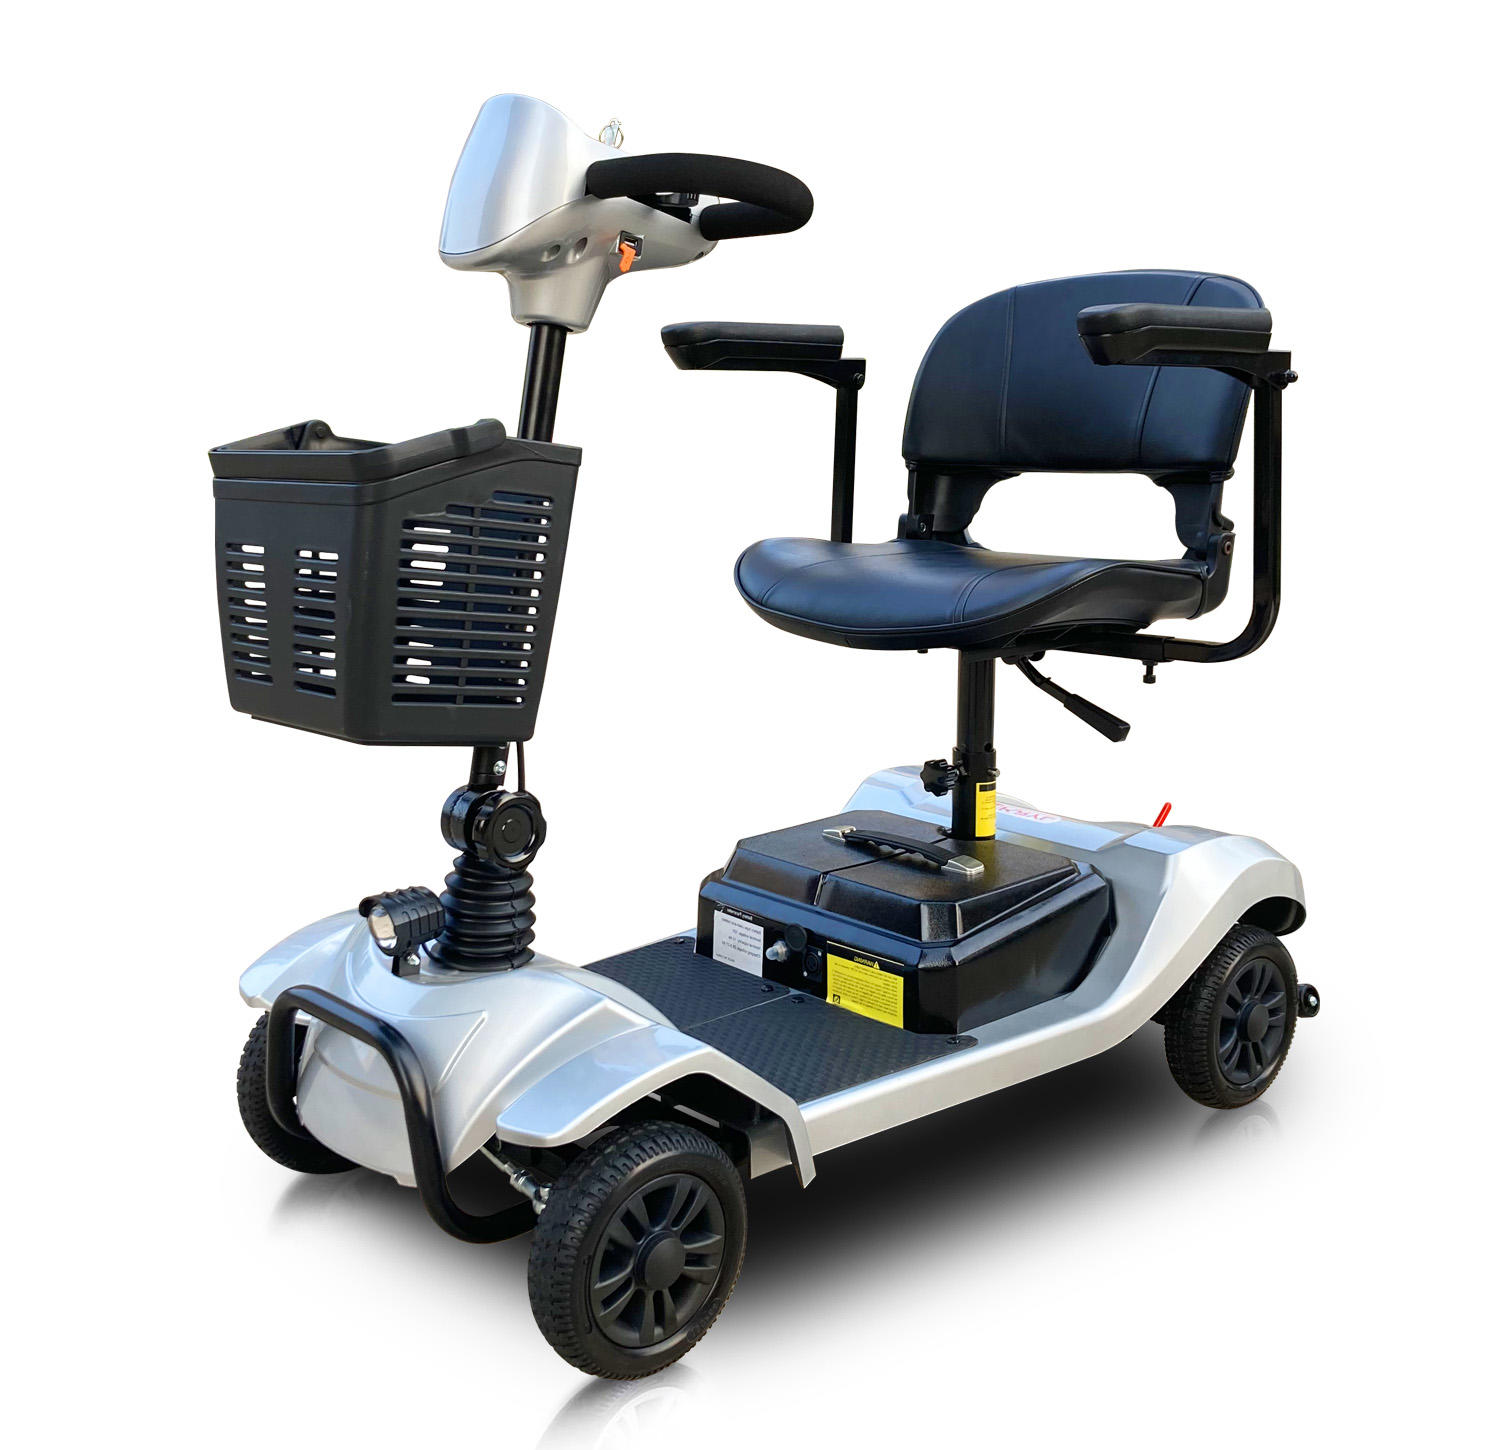 Emotor Silver 330lbs Mobility Scooter for Seniors Elderly Adults, 250W Strong Motor w/ Stable 4 Wheels Scooter for Outdoor Driving